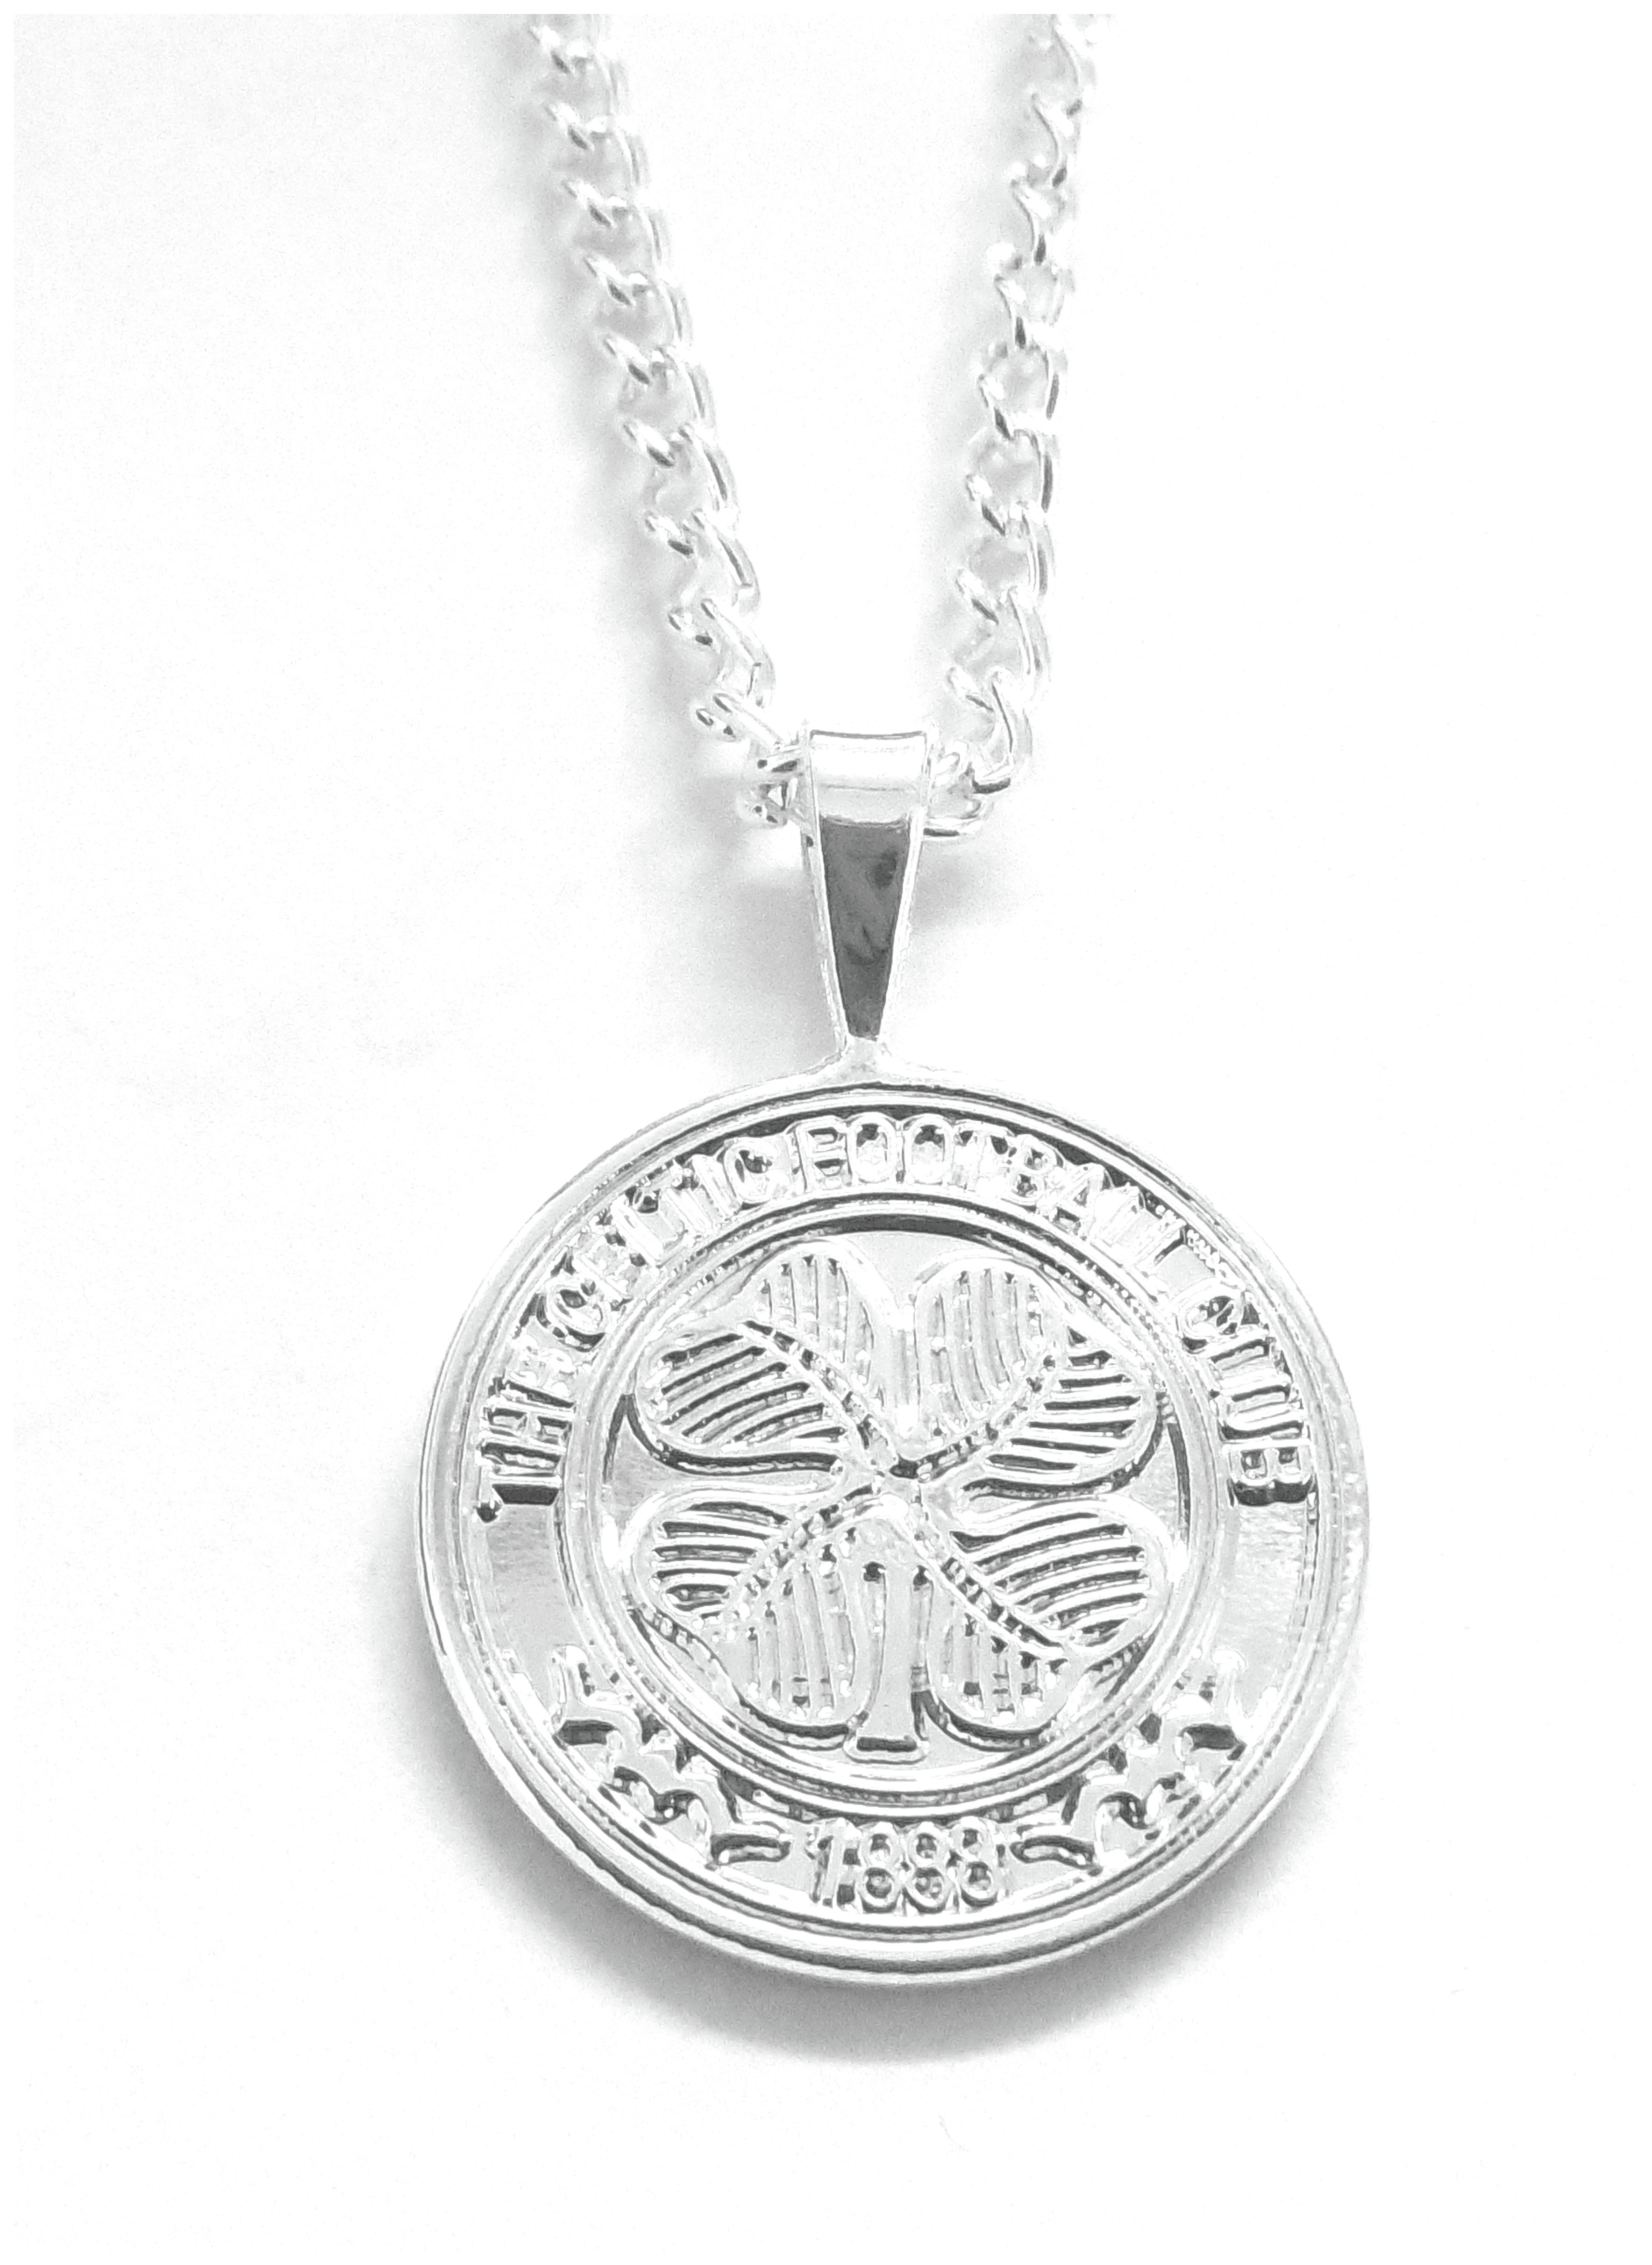 Silver Plated Celtic Pendant and Chain.